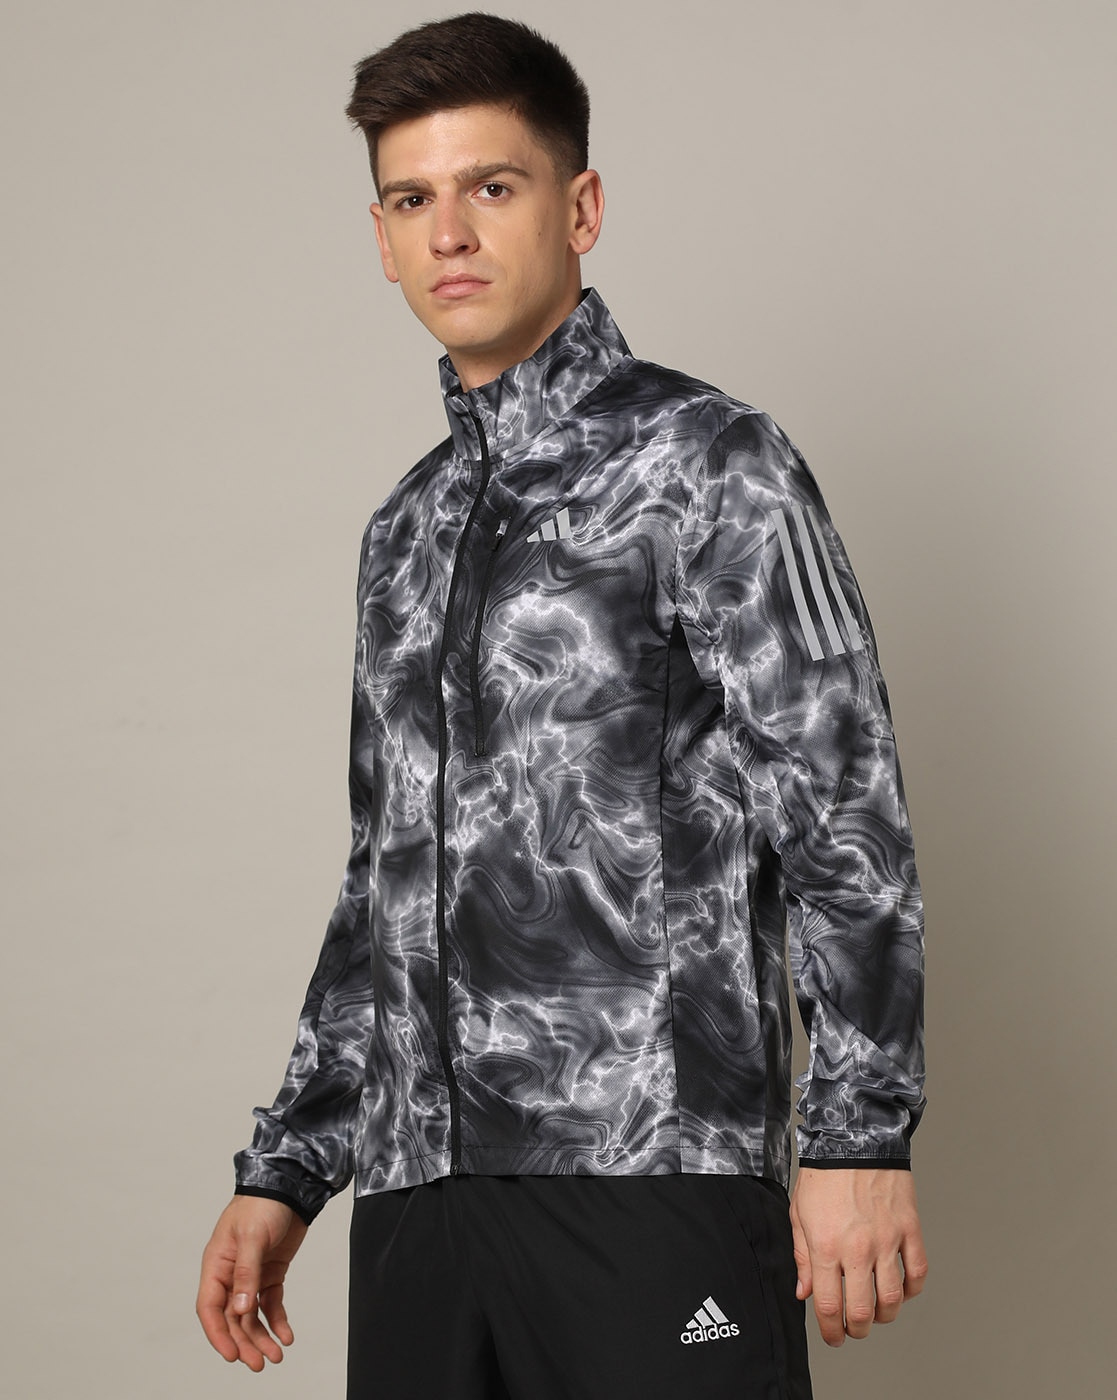 Buy Black Jackets & for by Online Men Coats ADIDAS